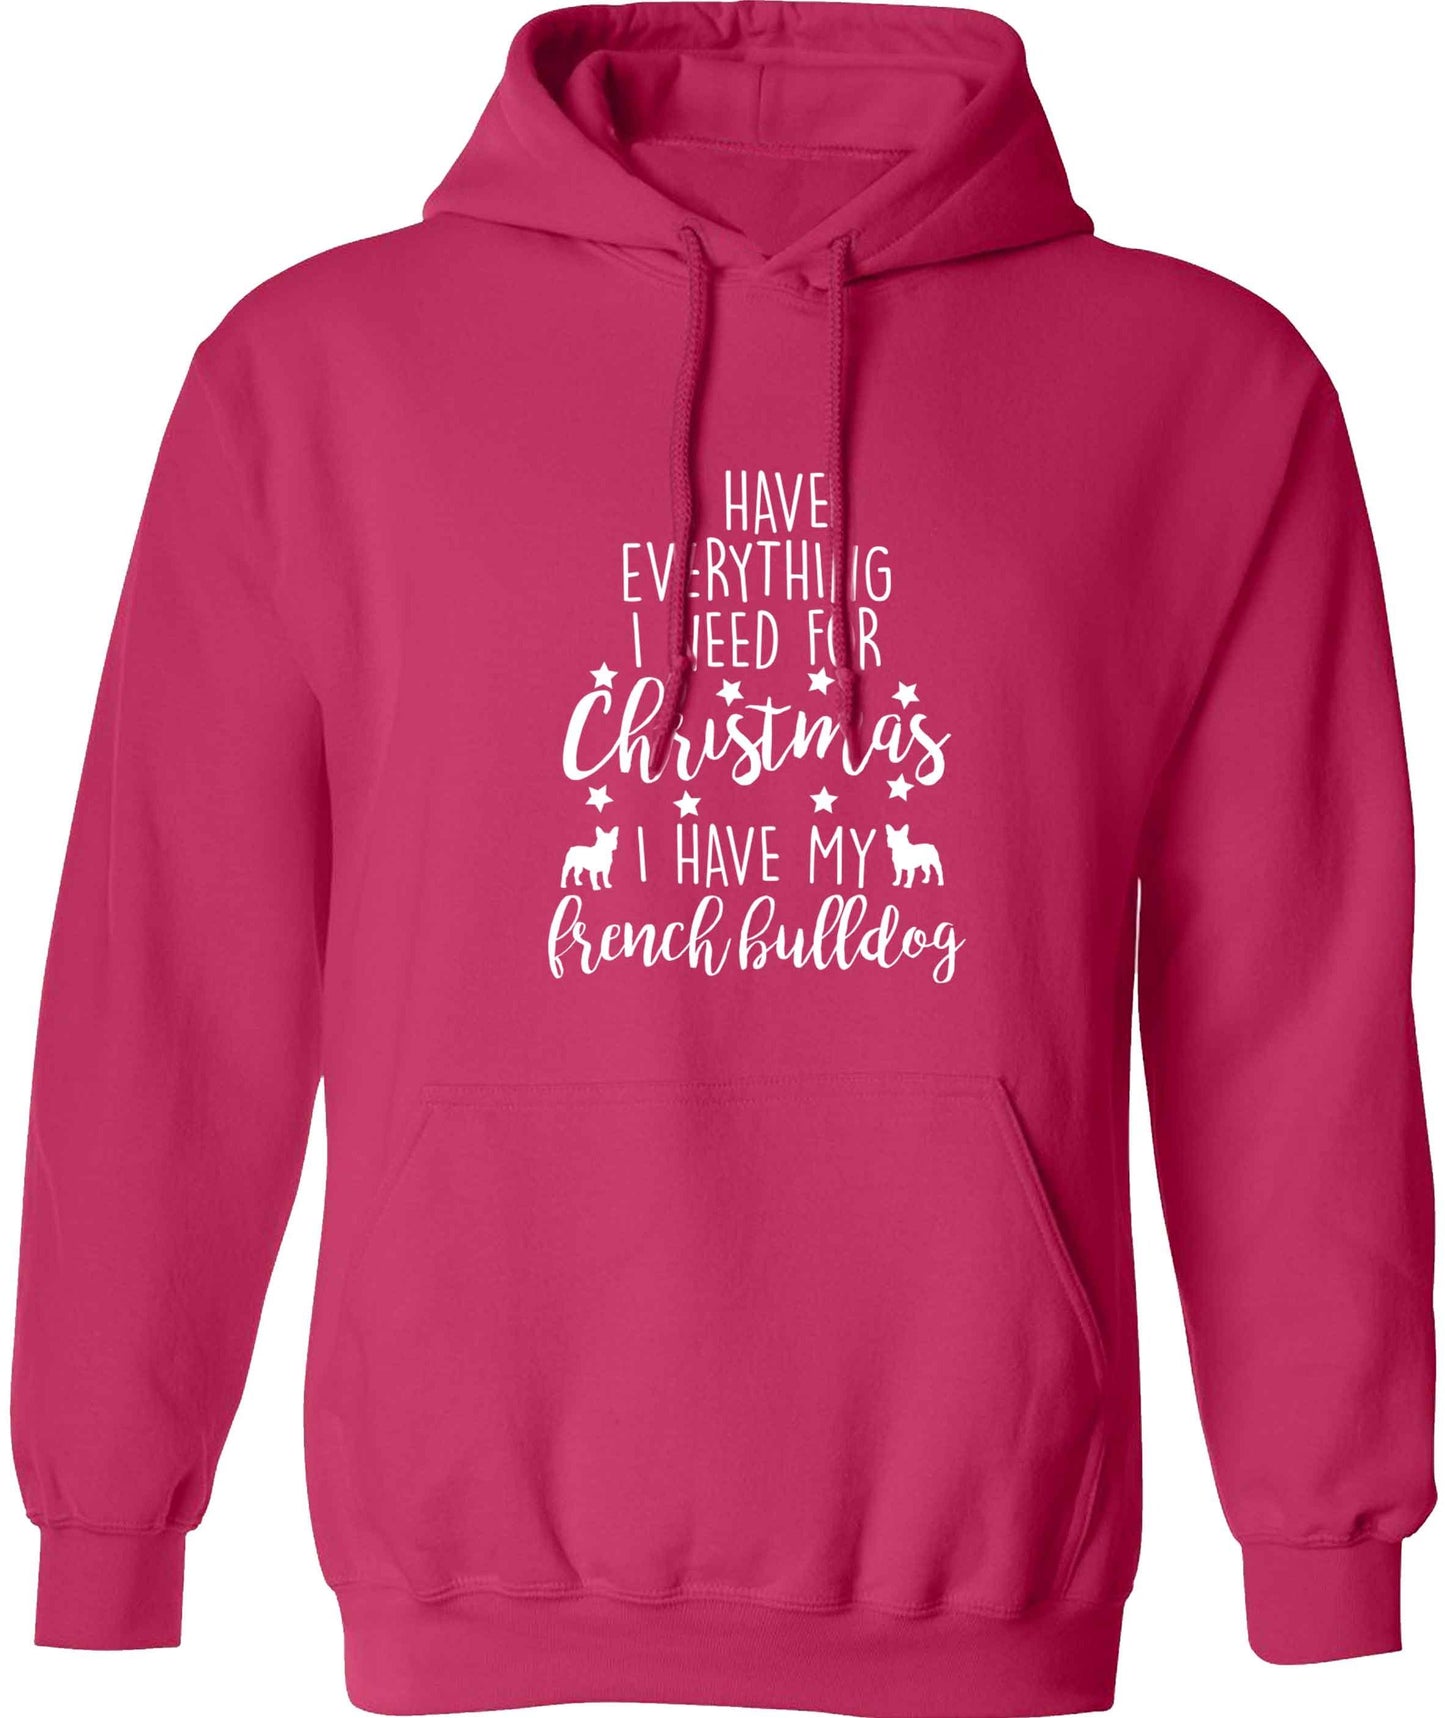 I have everything I need for Christmas I have my french bulldog adults unisex pink hoodie 2XL